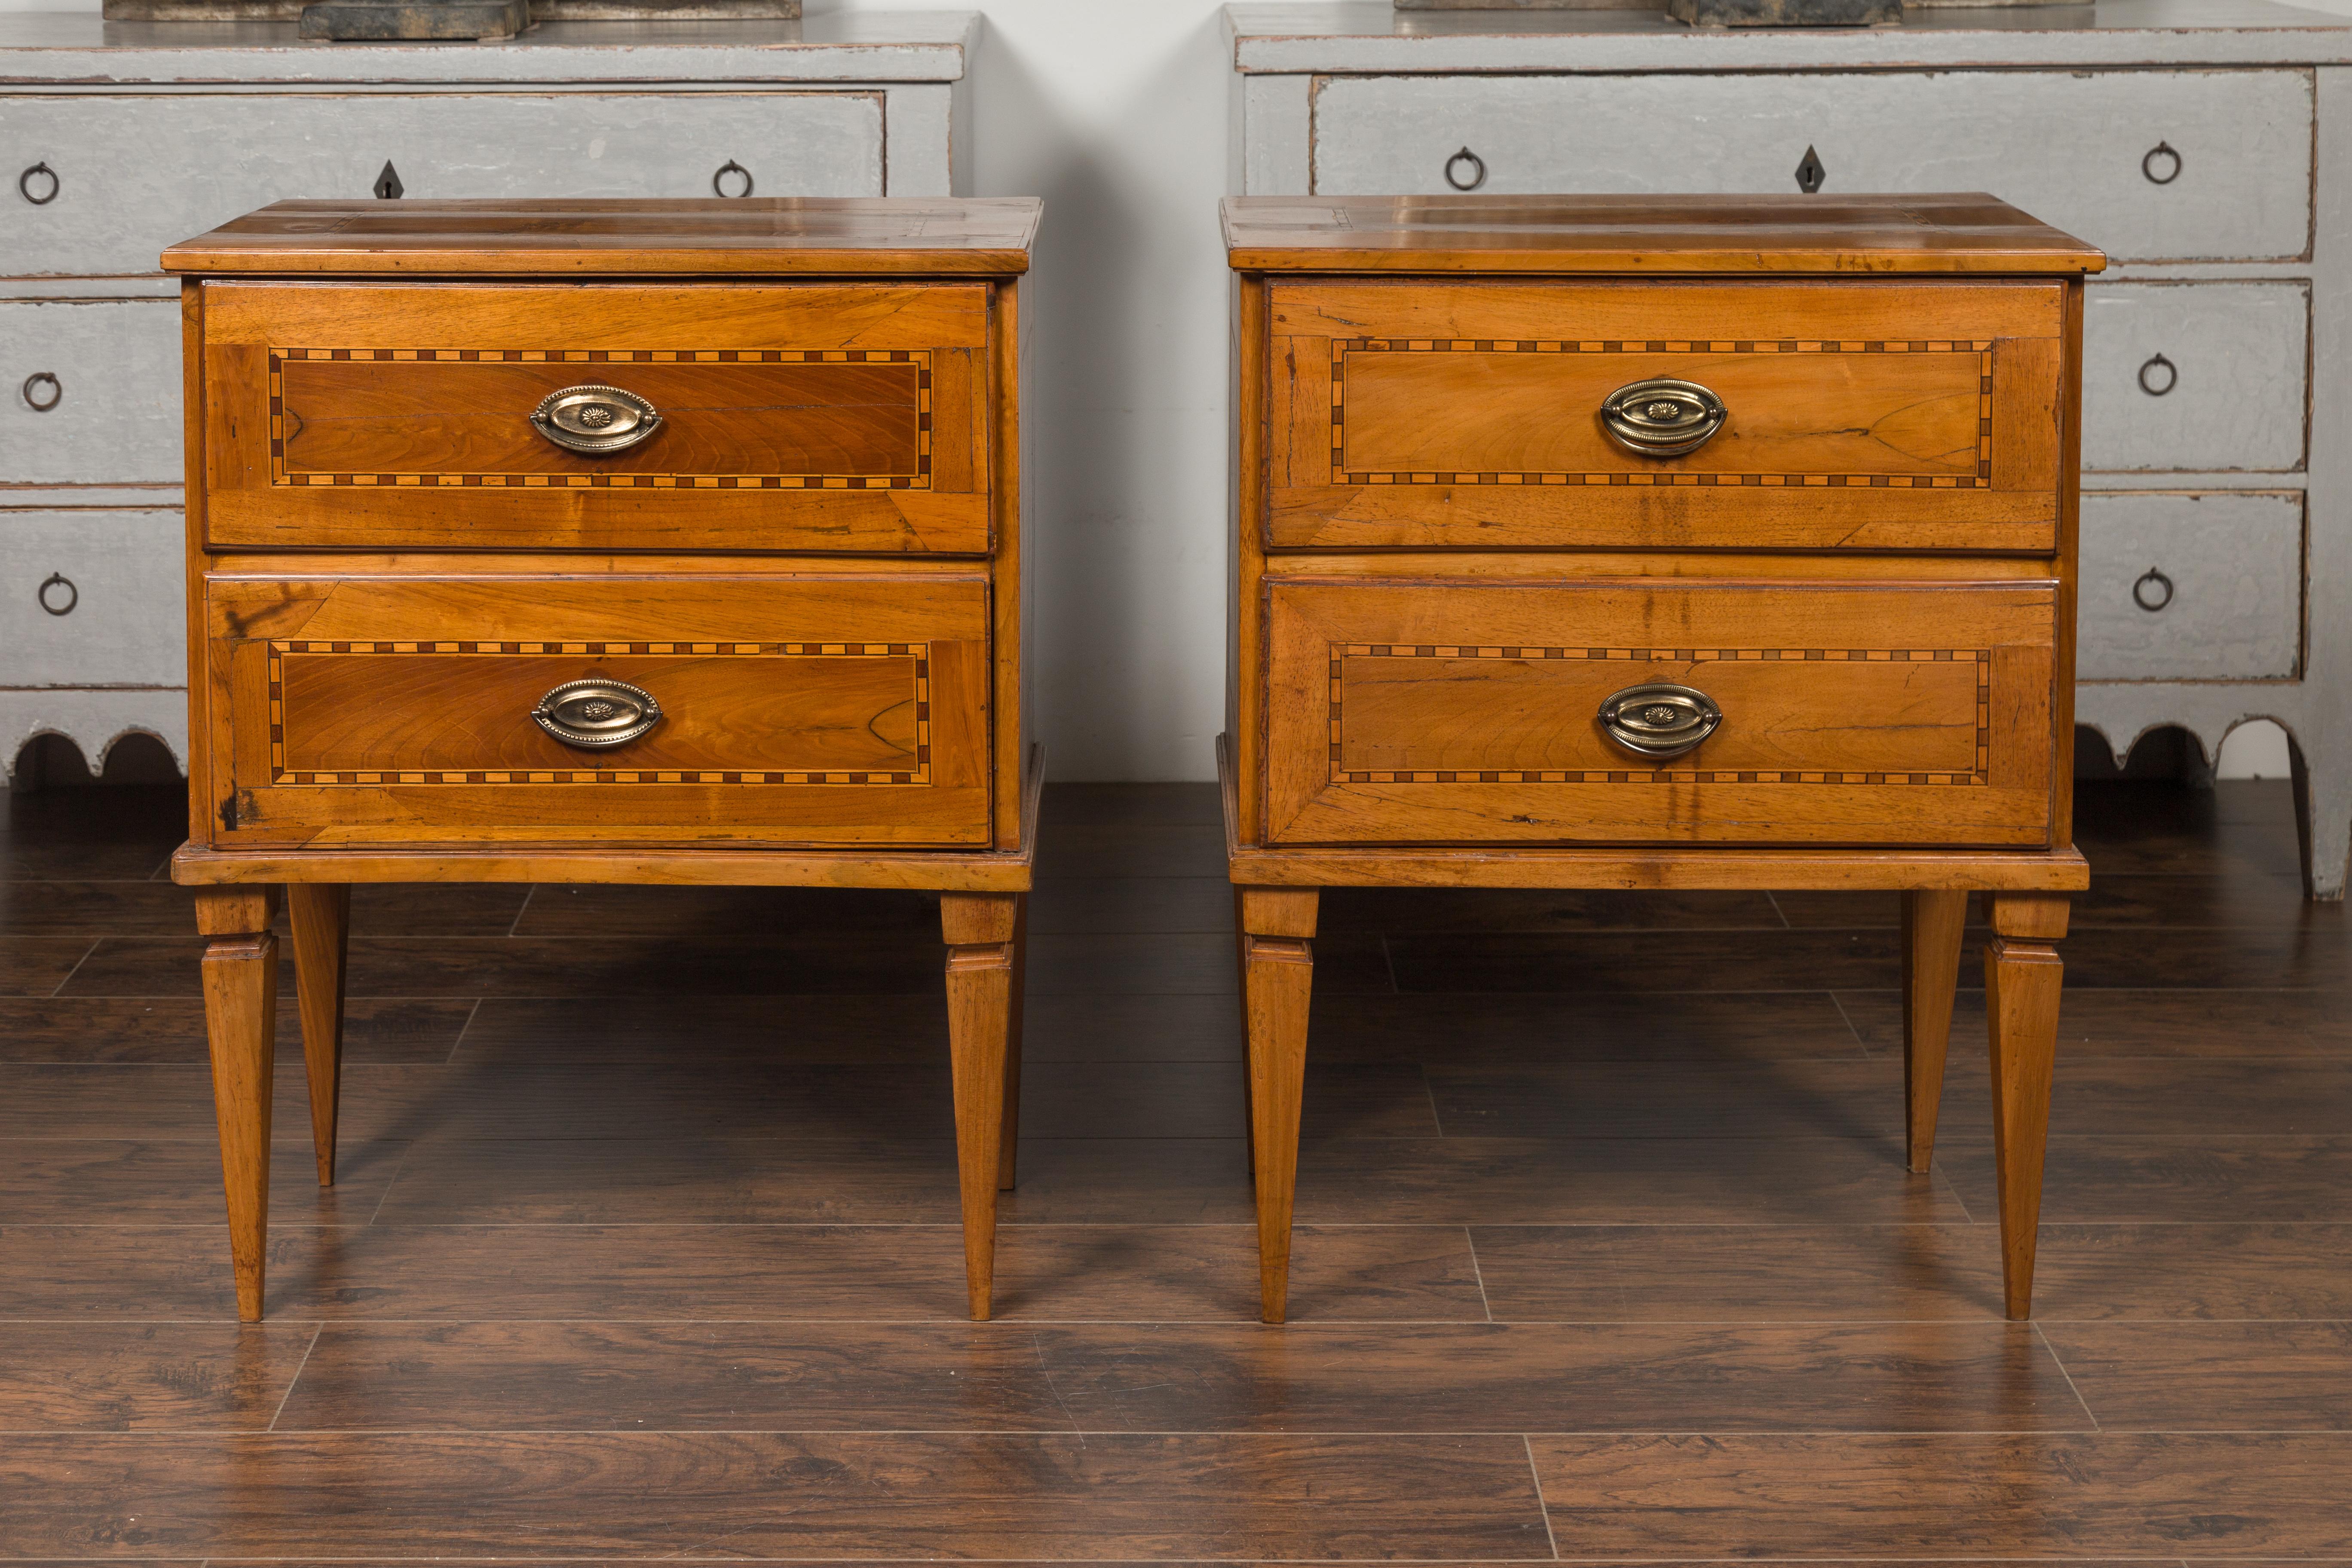 A pair of Italian neoclassical style walnut commodes from the mid-19th century, with two drawers, inlay and tapered legs. Born in Italy during the 1850s, each of this pair of petite commodes features a rectangular top sitting above two drawers,